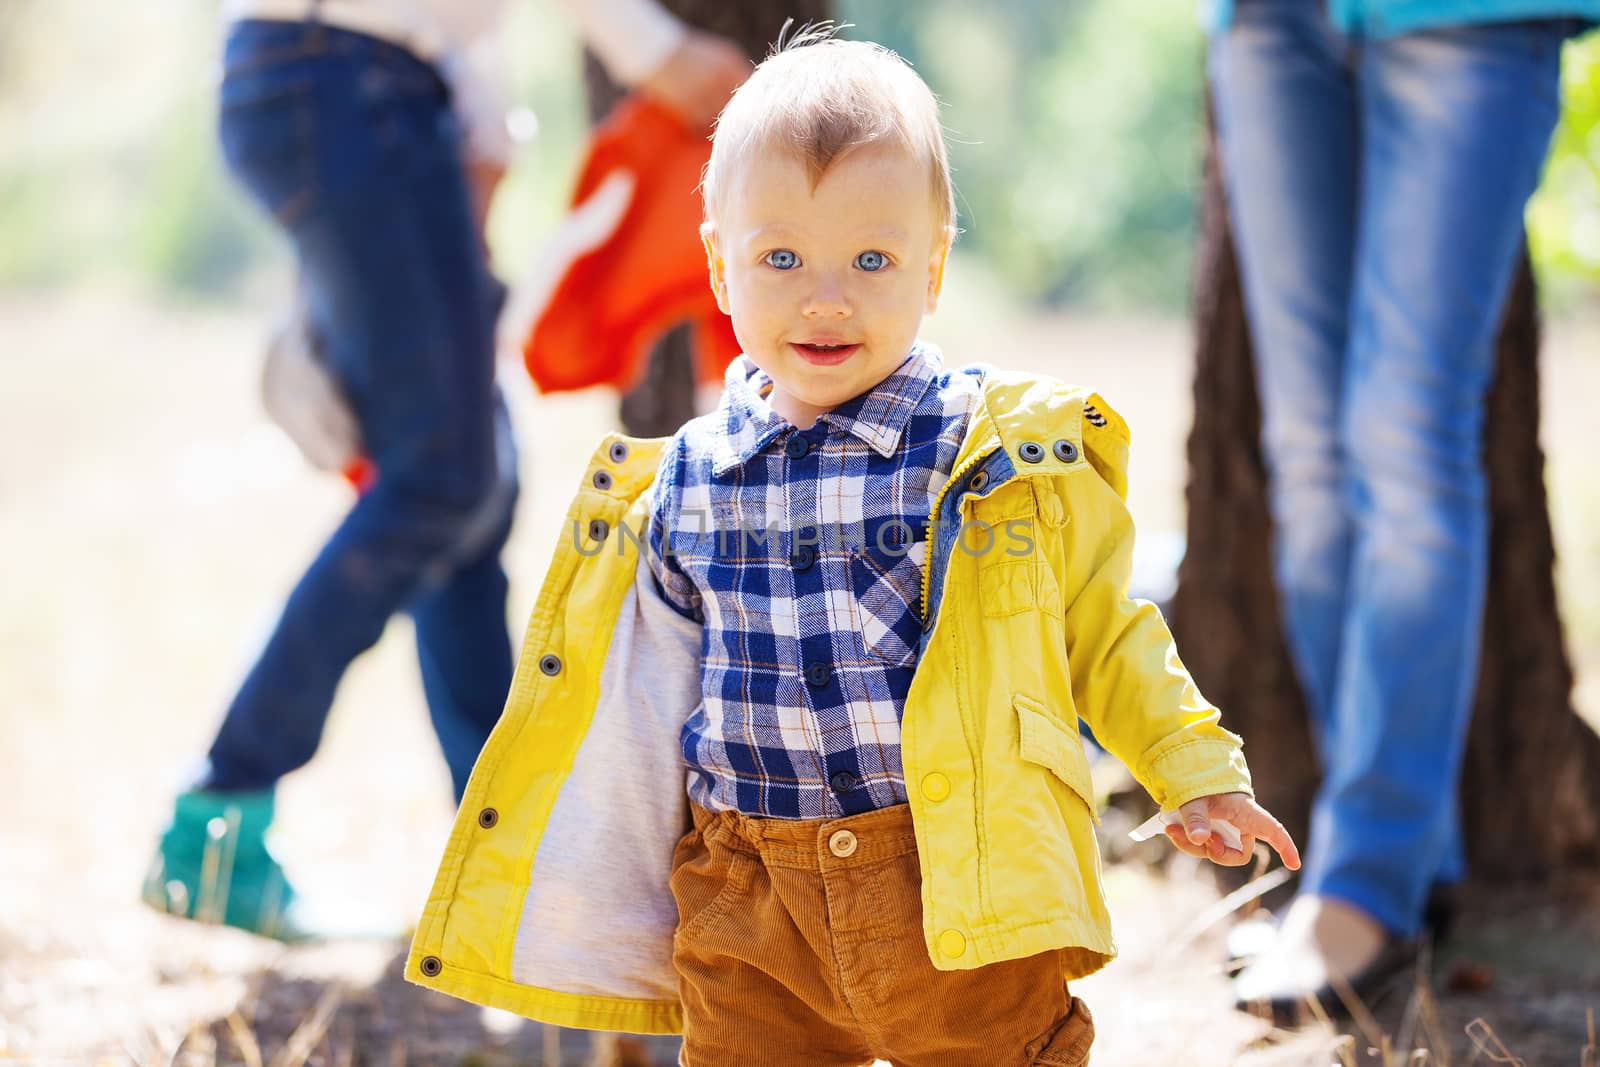 Toddler boy on bright autumn day, with blurred adults in the background